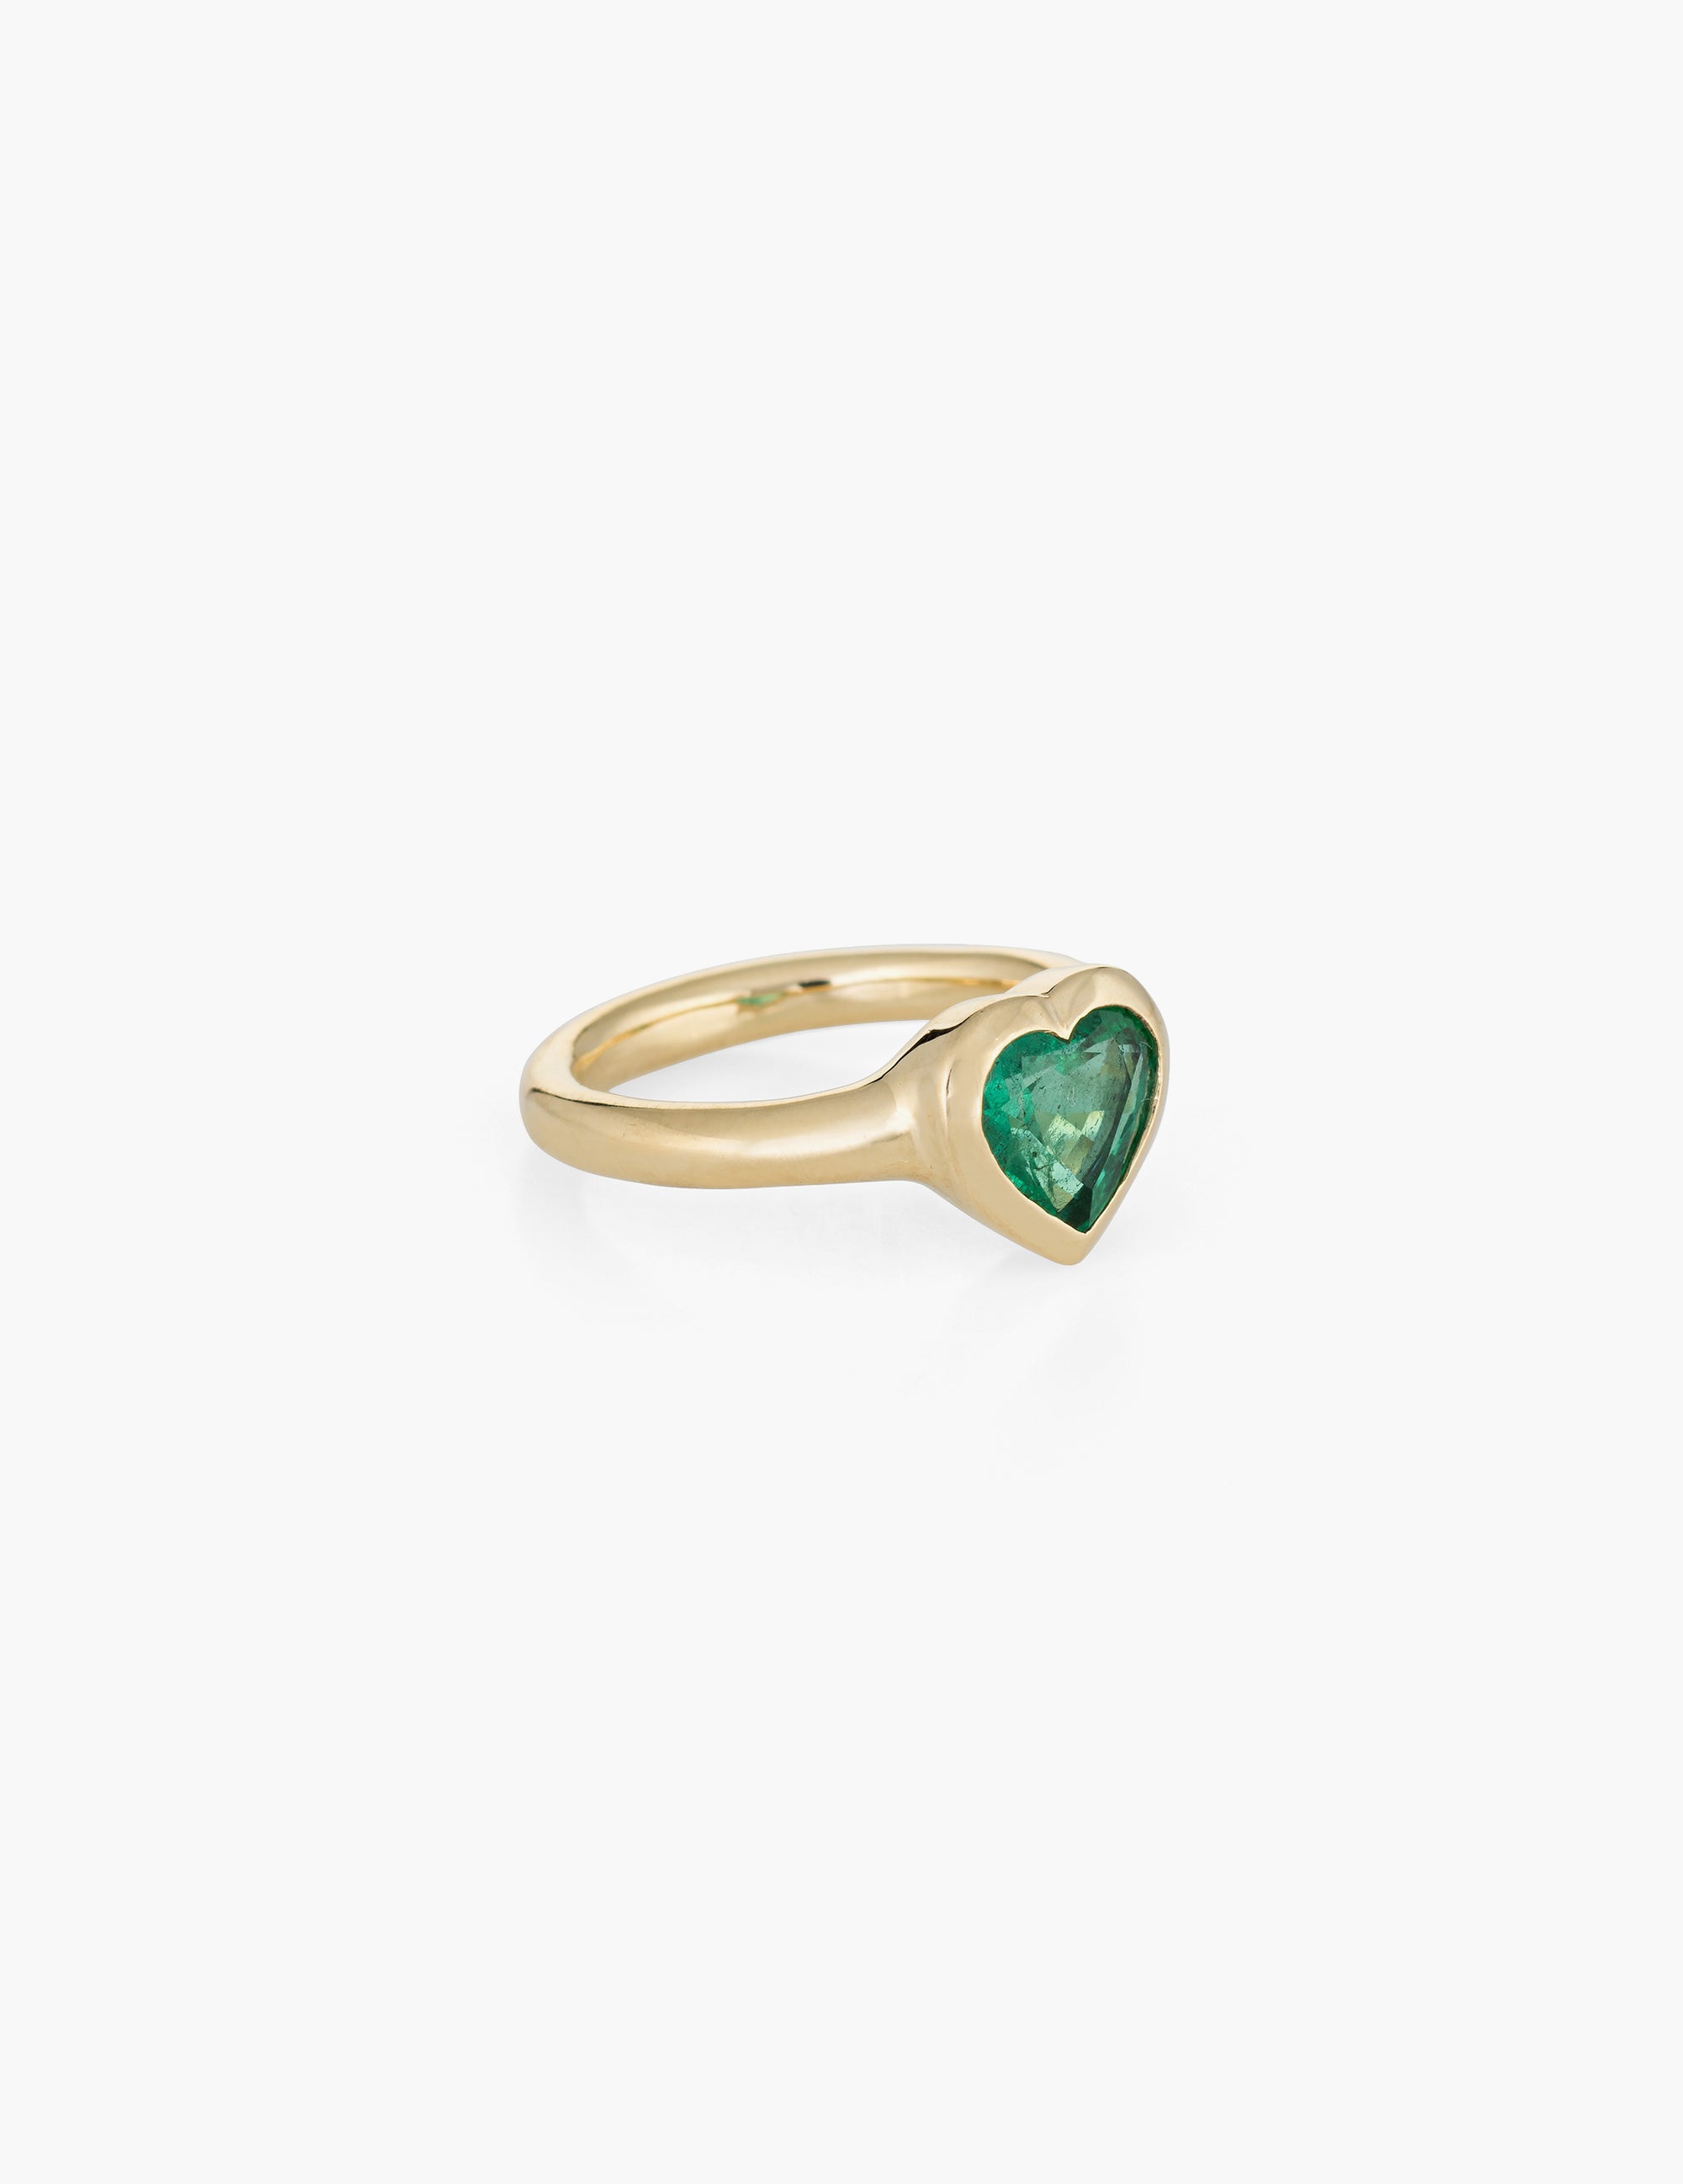 Large emerald heart ring